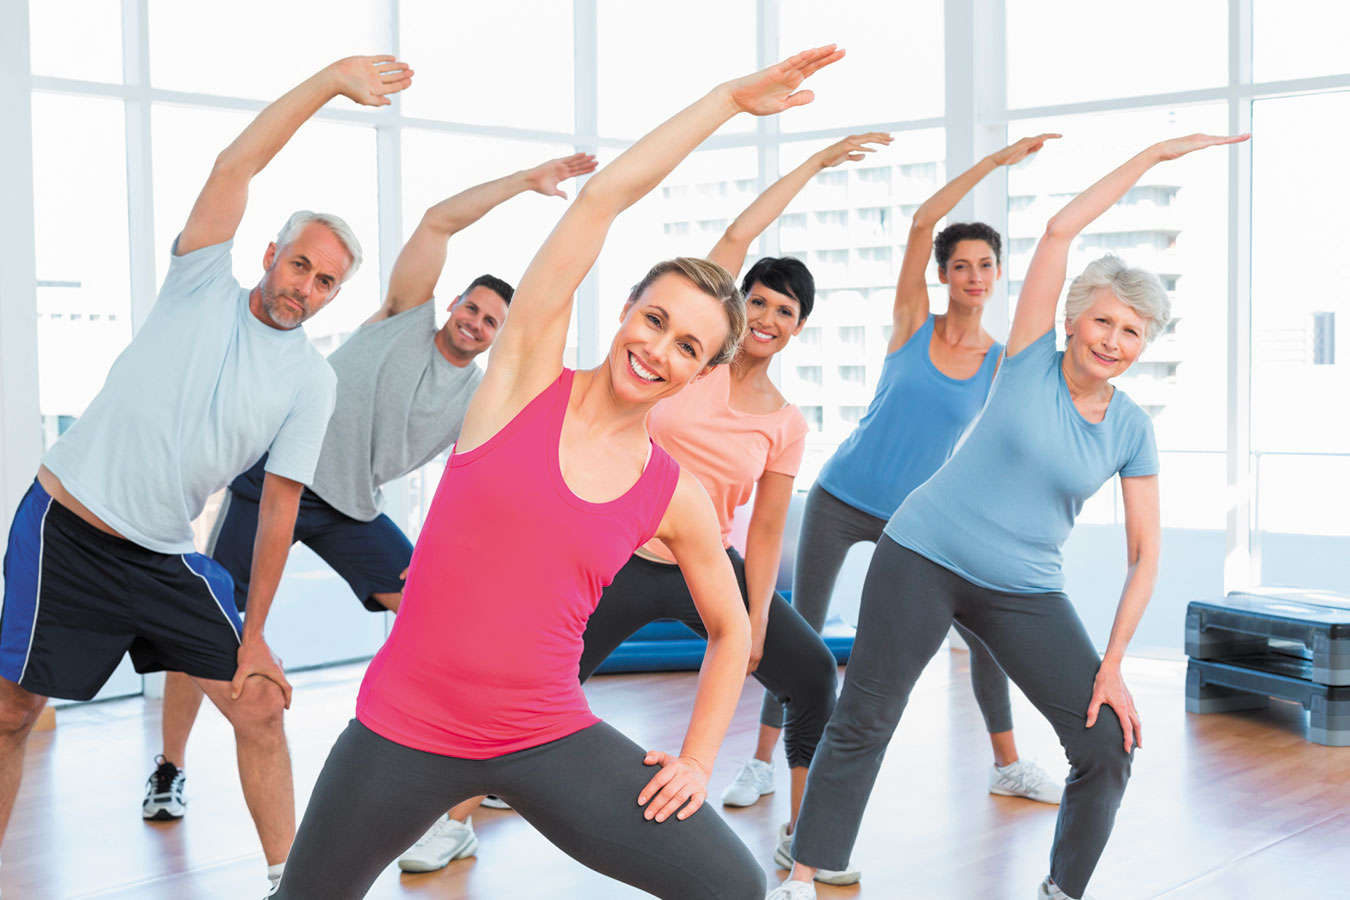 【Dr Claudia Ng, BSc, DC - 7 Benefits of Doing Exercises】